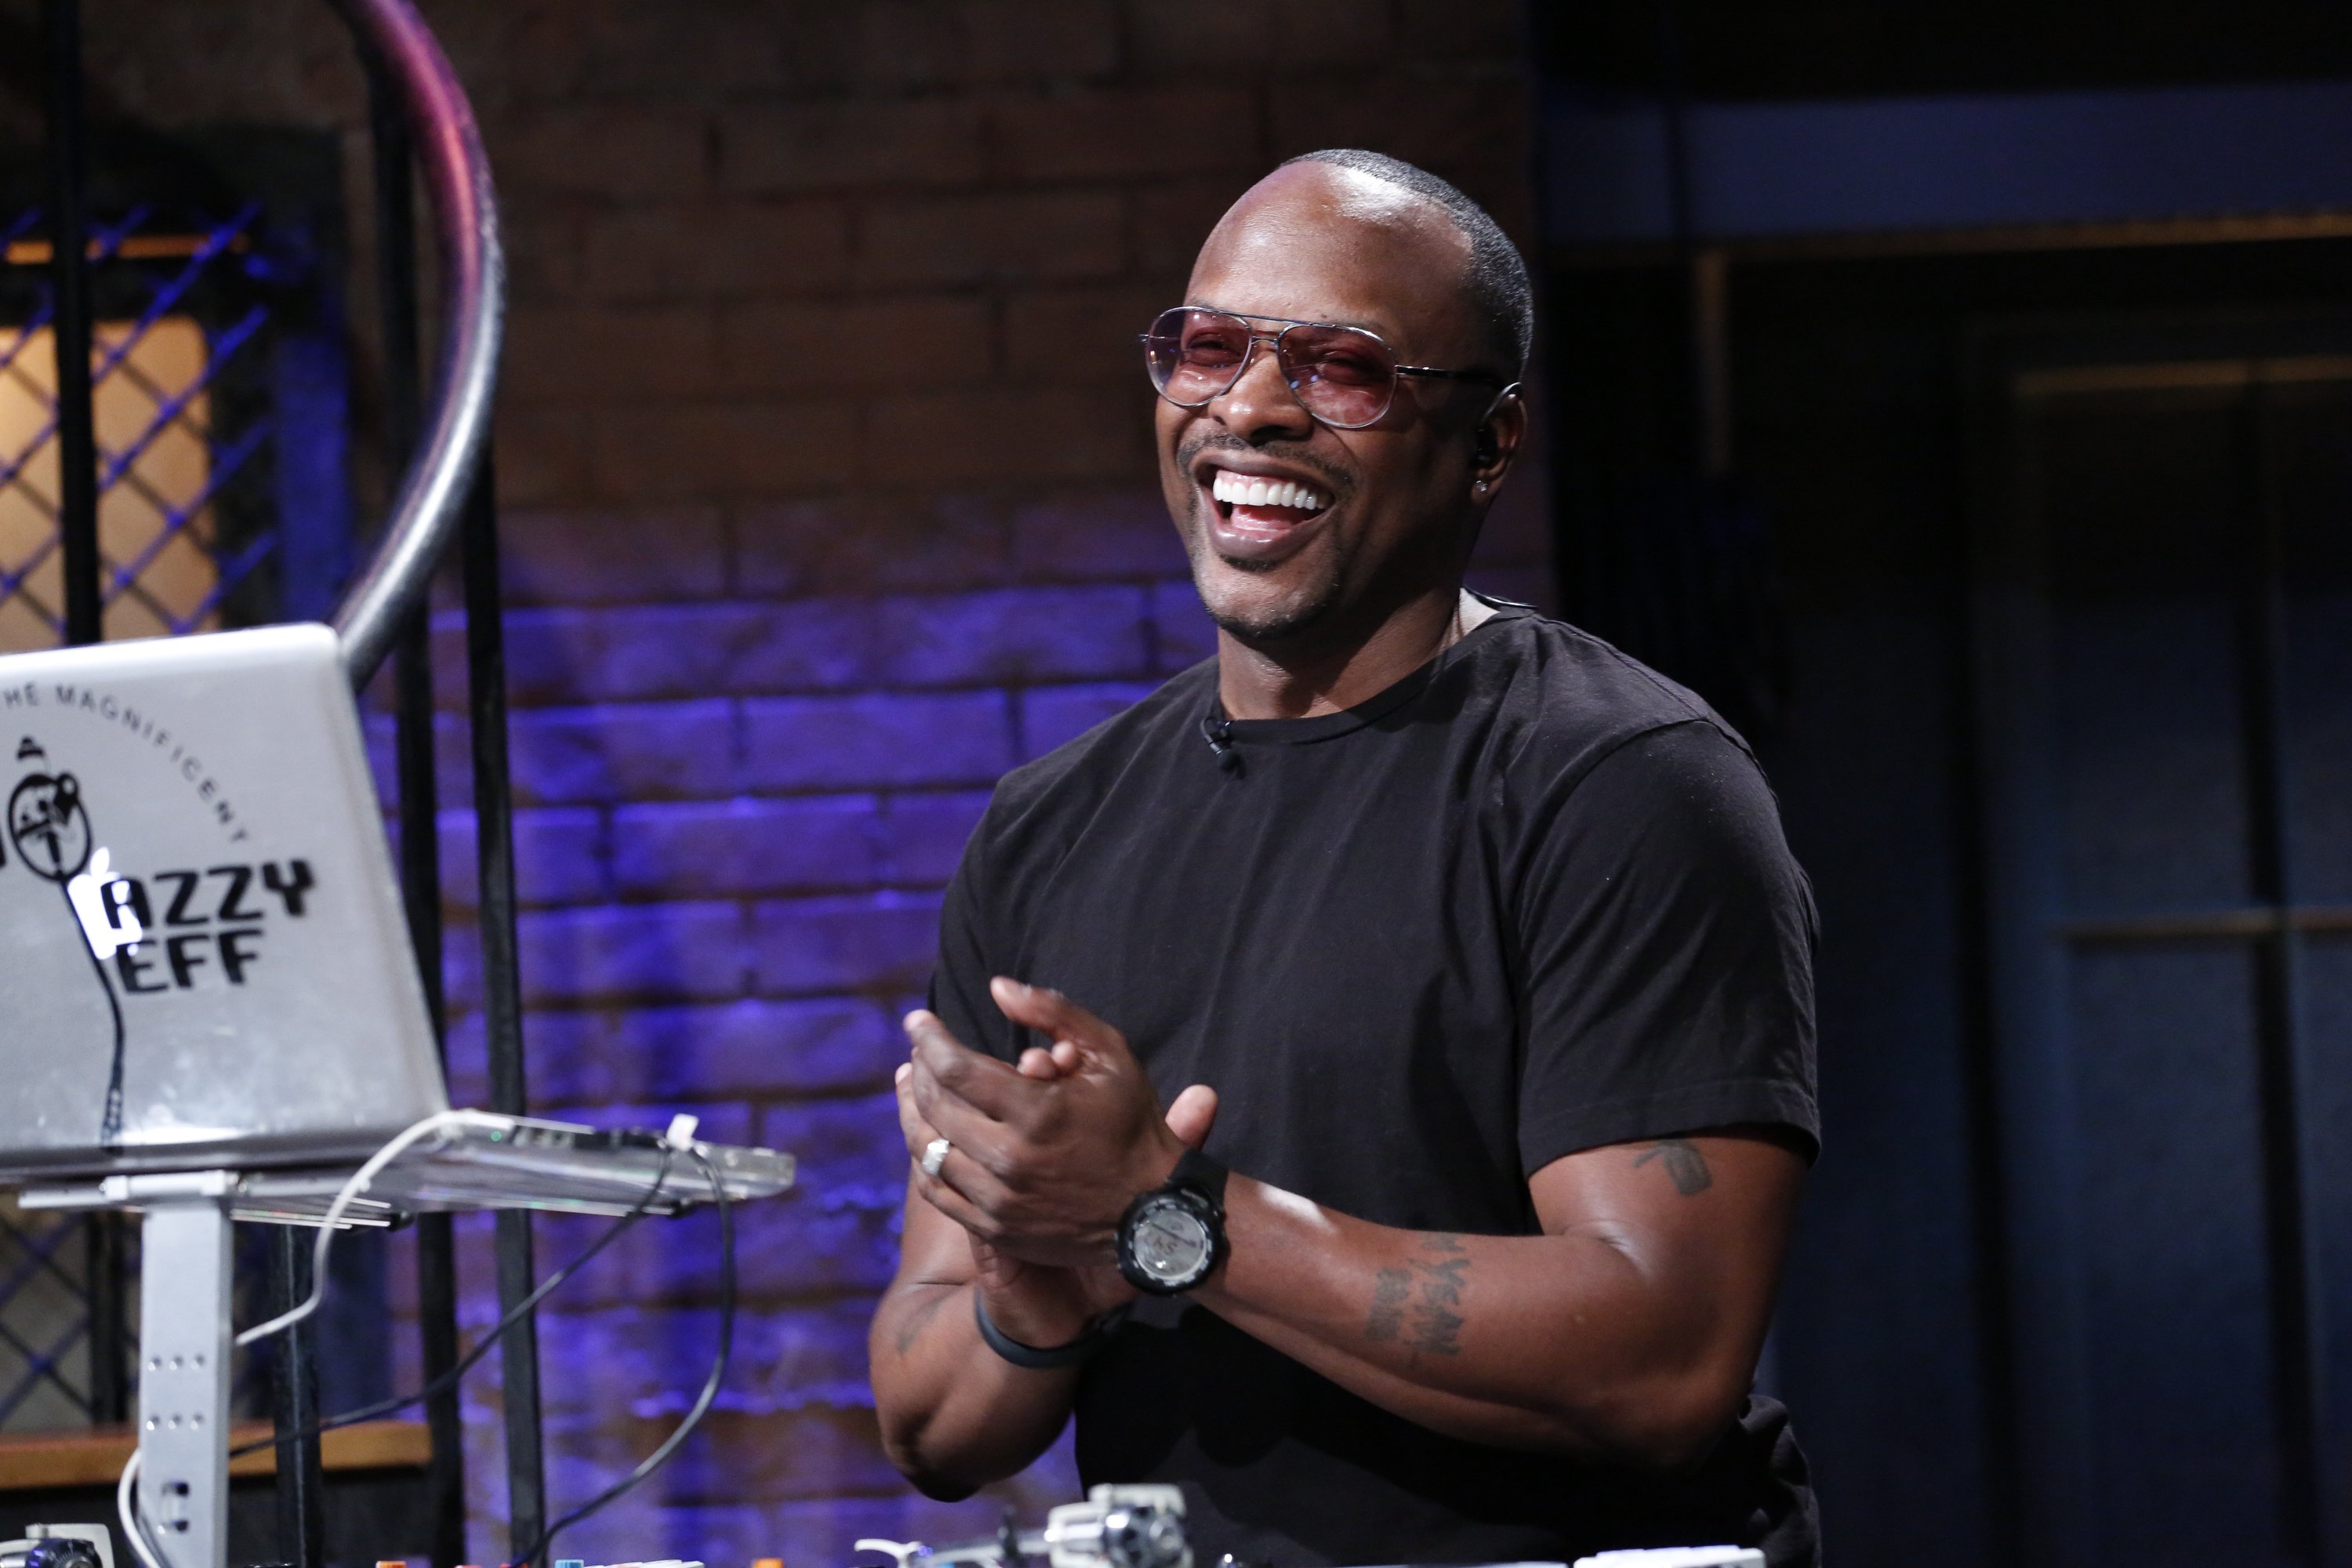 LATE NIGHT WITH JIMMY FALLON -- Episode 809 -- Pictured: DJ Jazzy Jeff on April 1, 2013 | Photo: GettyImages